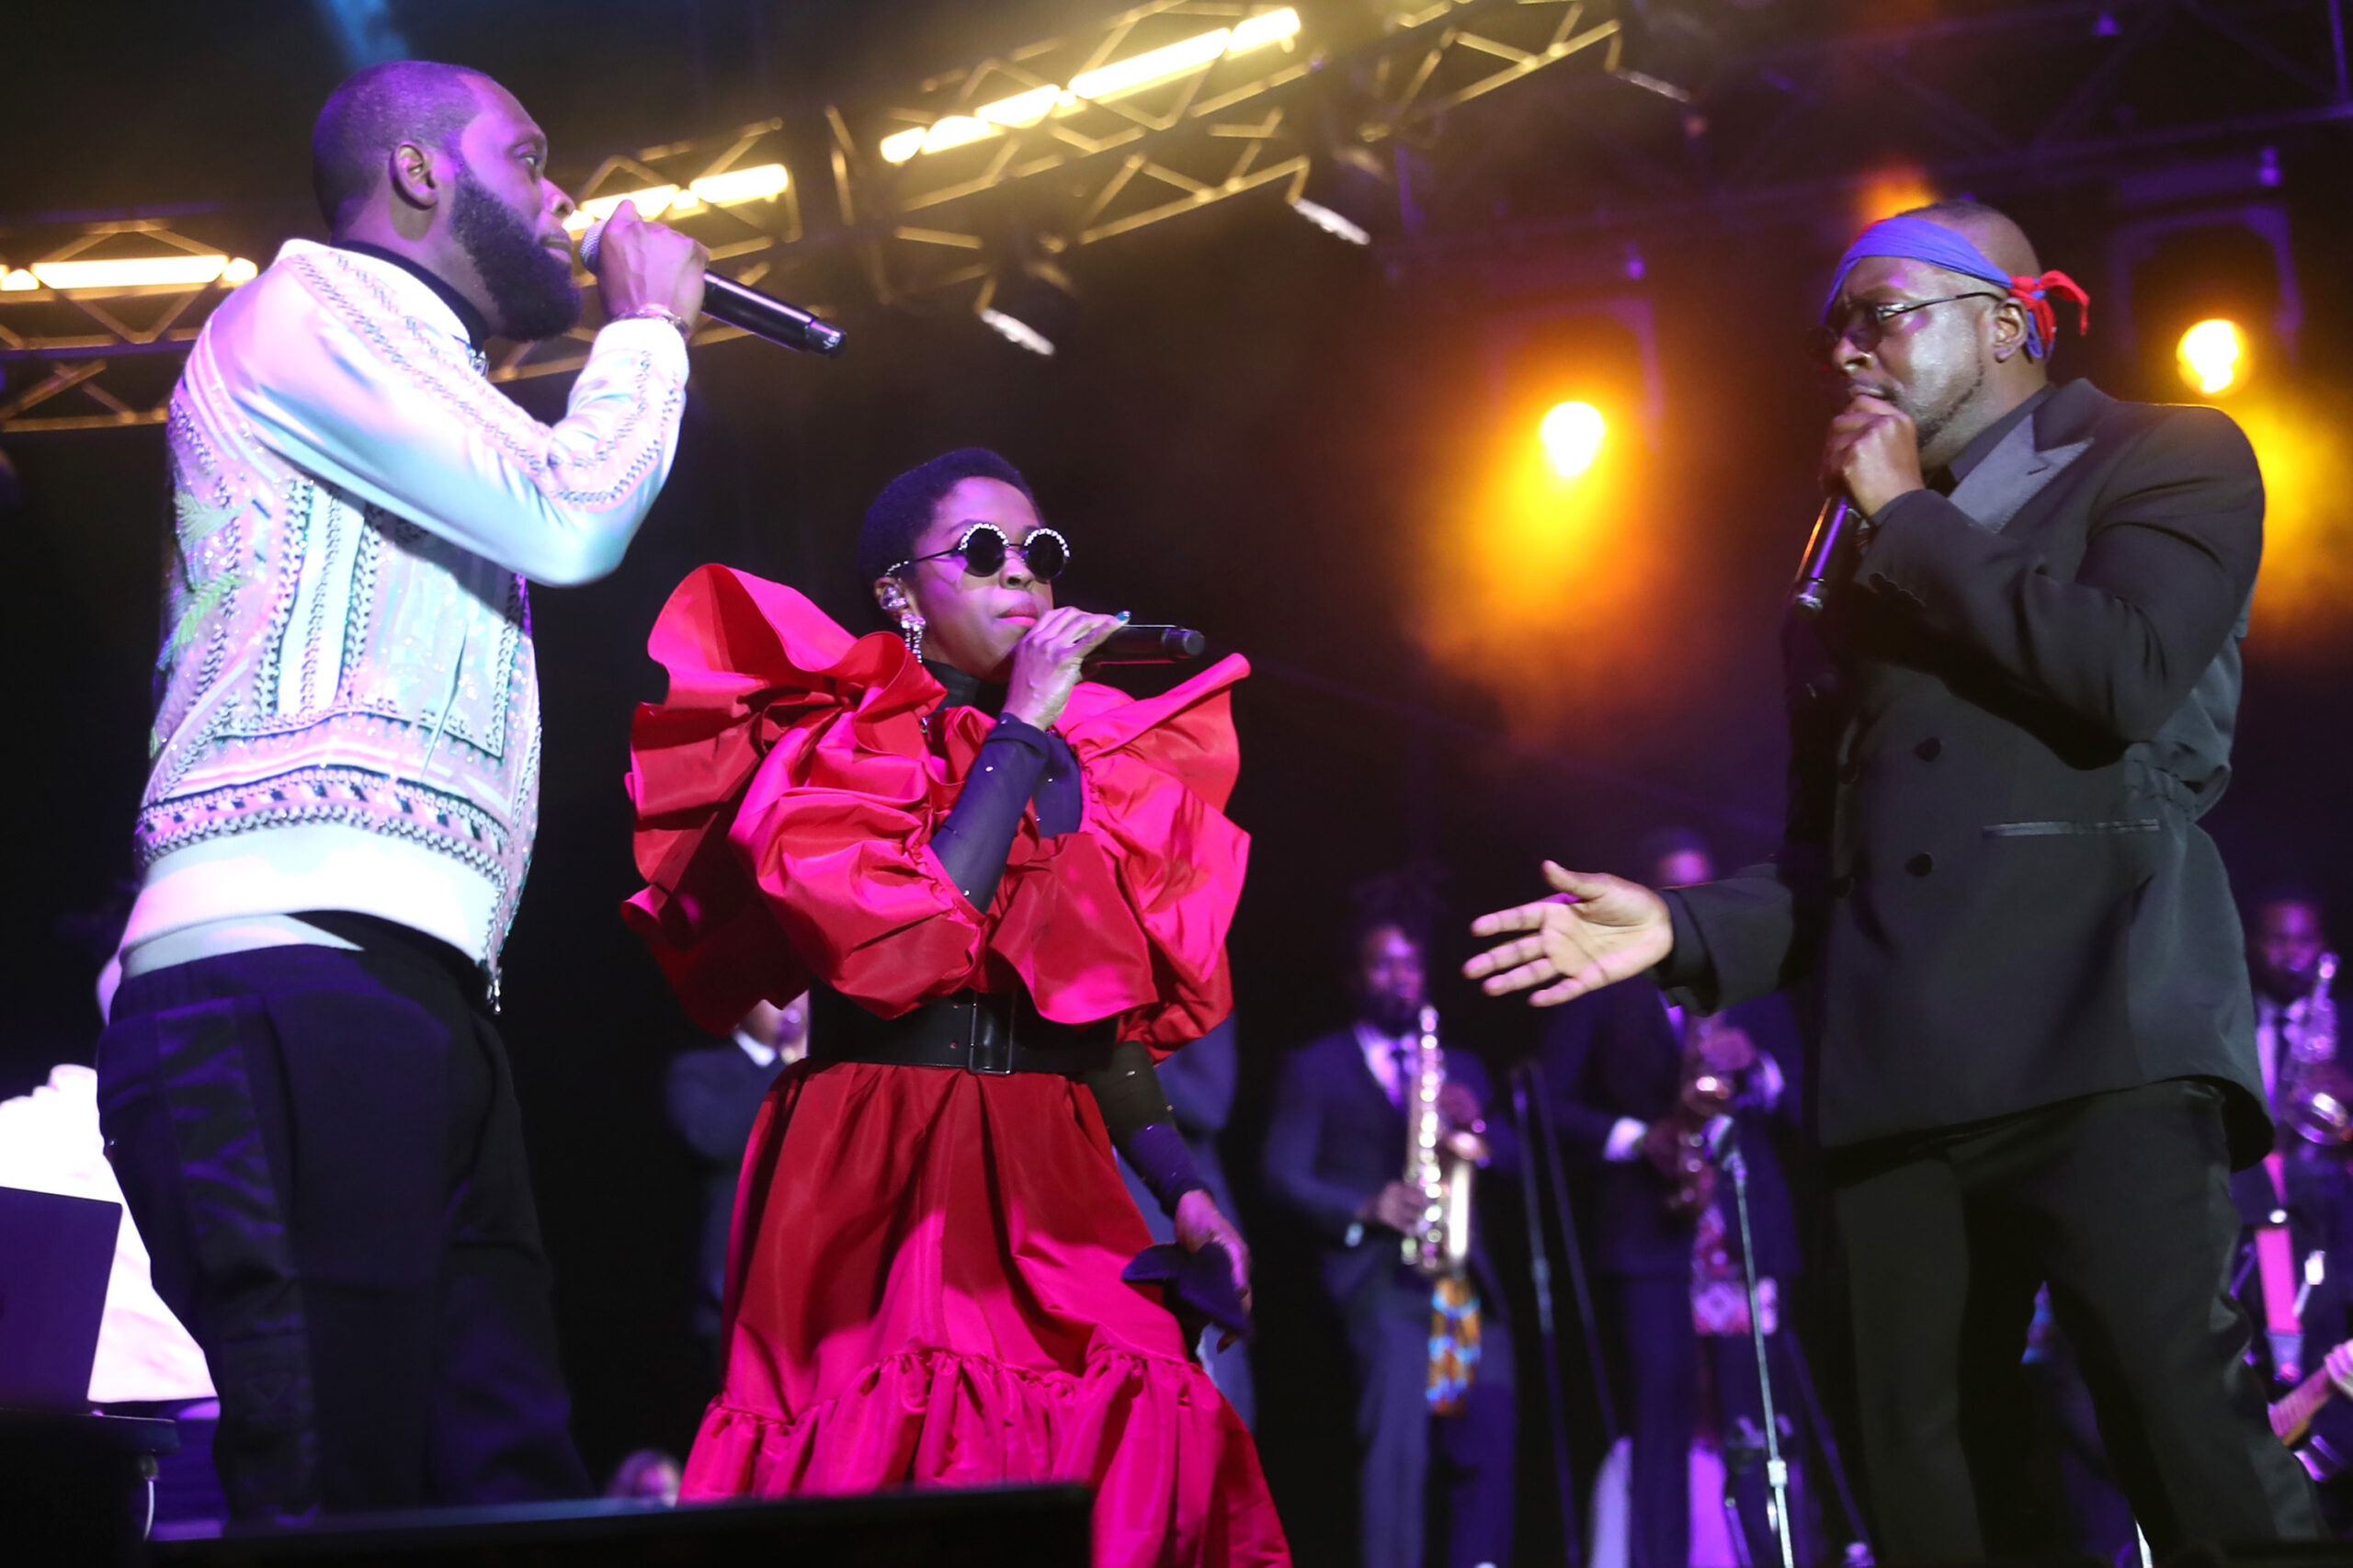 The Fugees Reunion Tour Reportedly Was Canceled Because of Pras Michel’s Alleged Involvement In Money Laundering Scheme